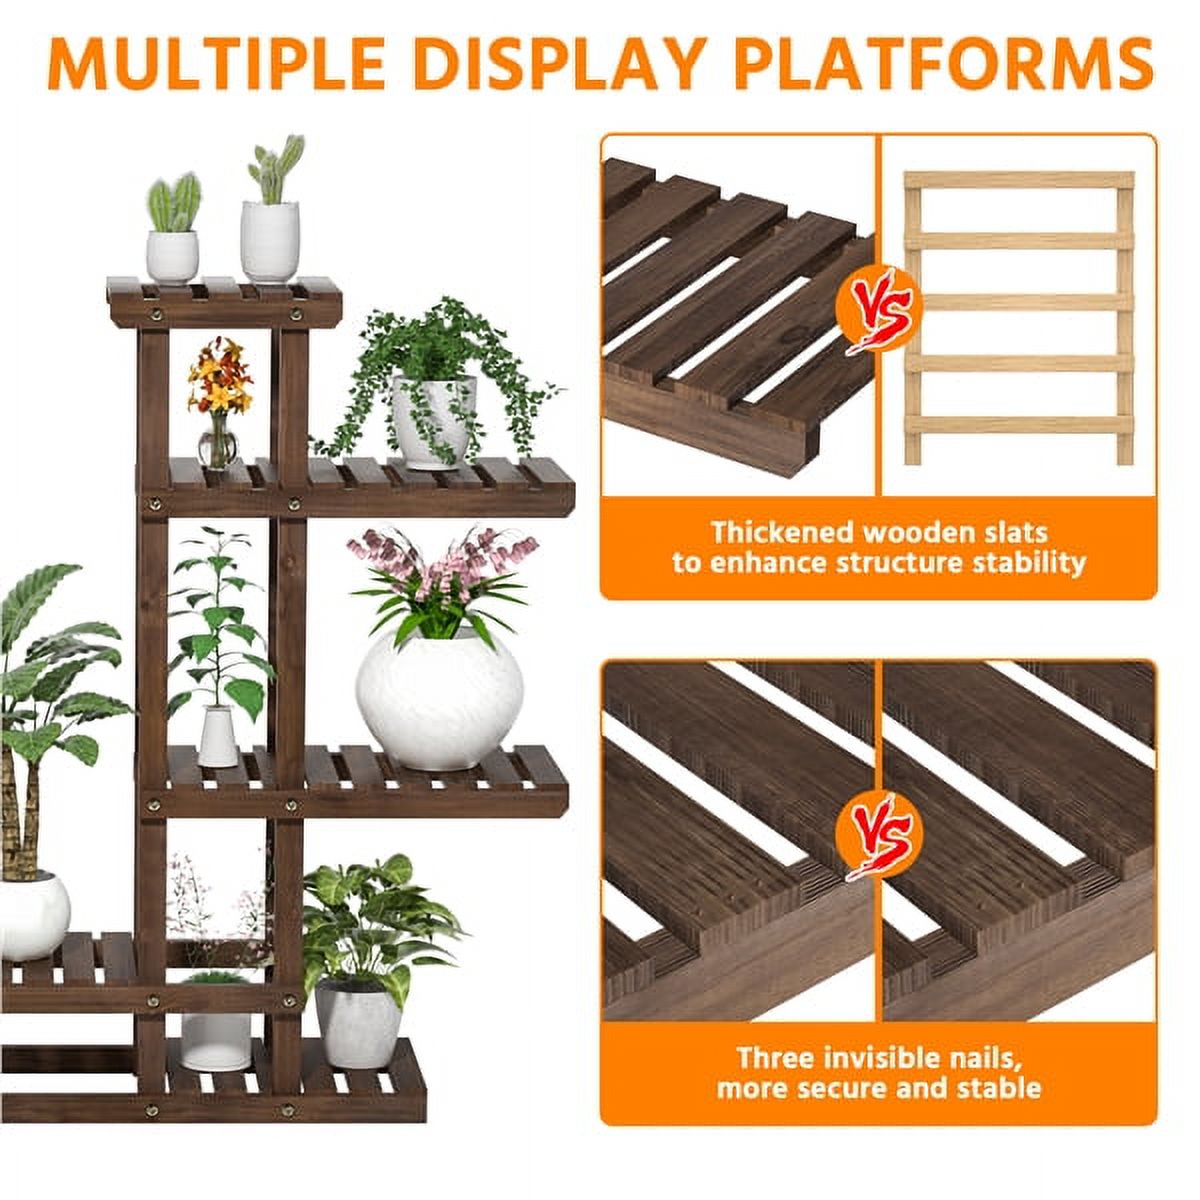 SmileMart 6-Tier Wooden Flower and Plant Display Stand for Garden, 38" H, Brown - image 7 of 9